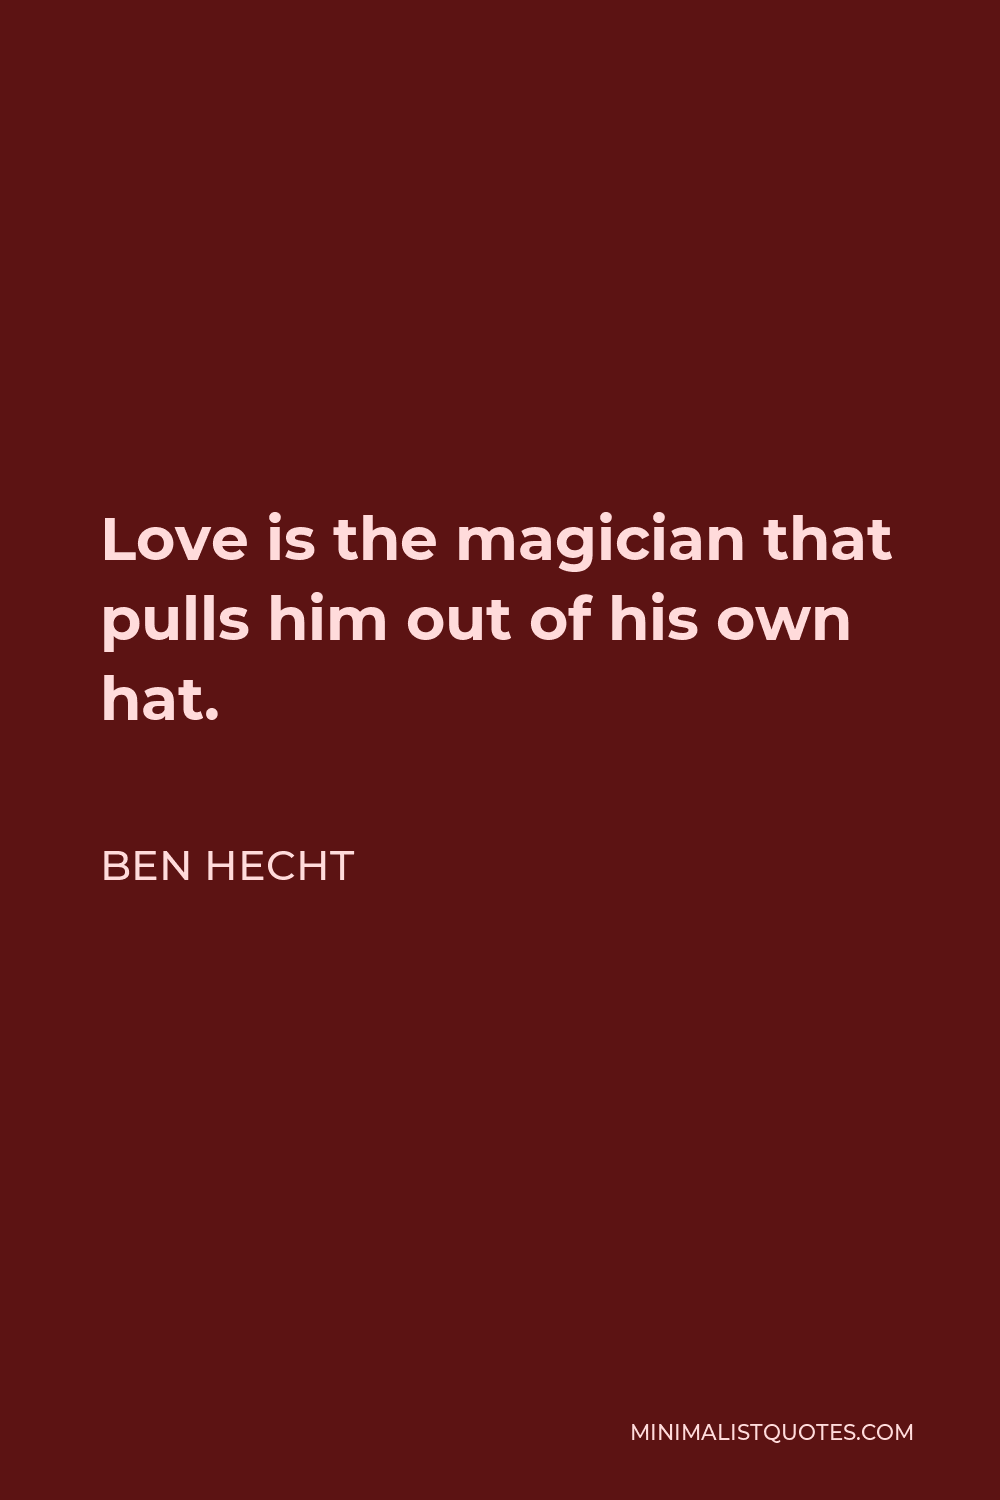 Ben Hecht Quote - Love is the magician that pulls him out of his own hat.